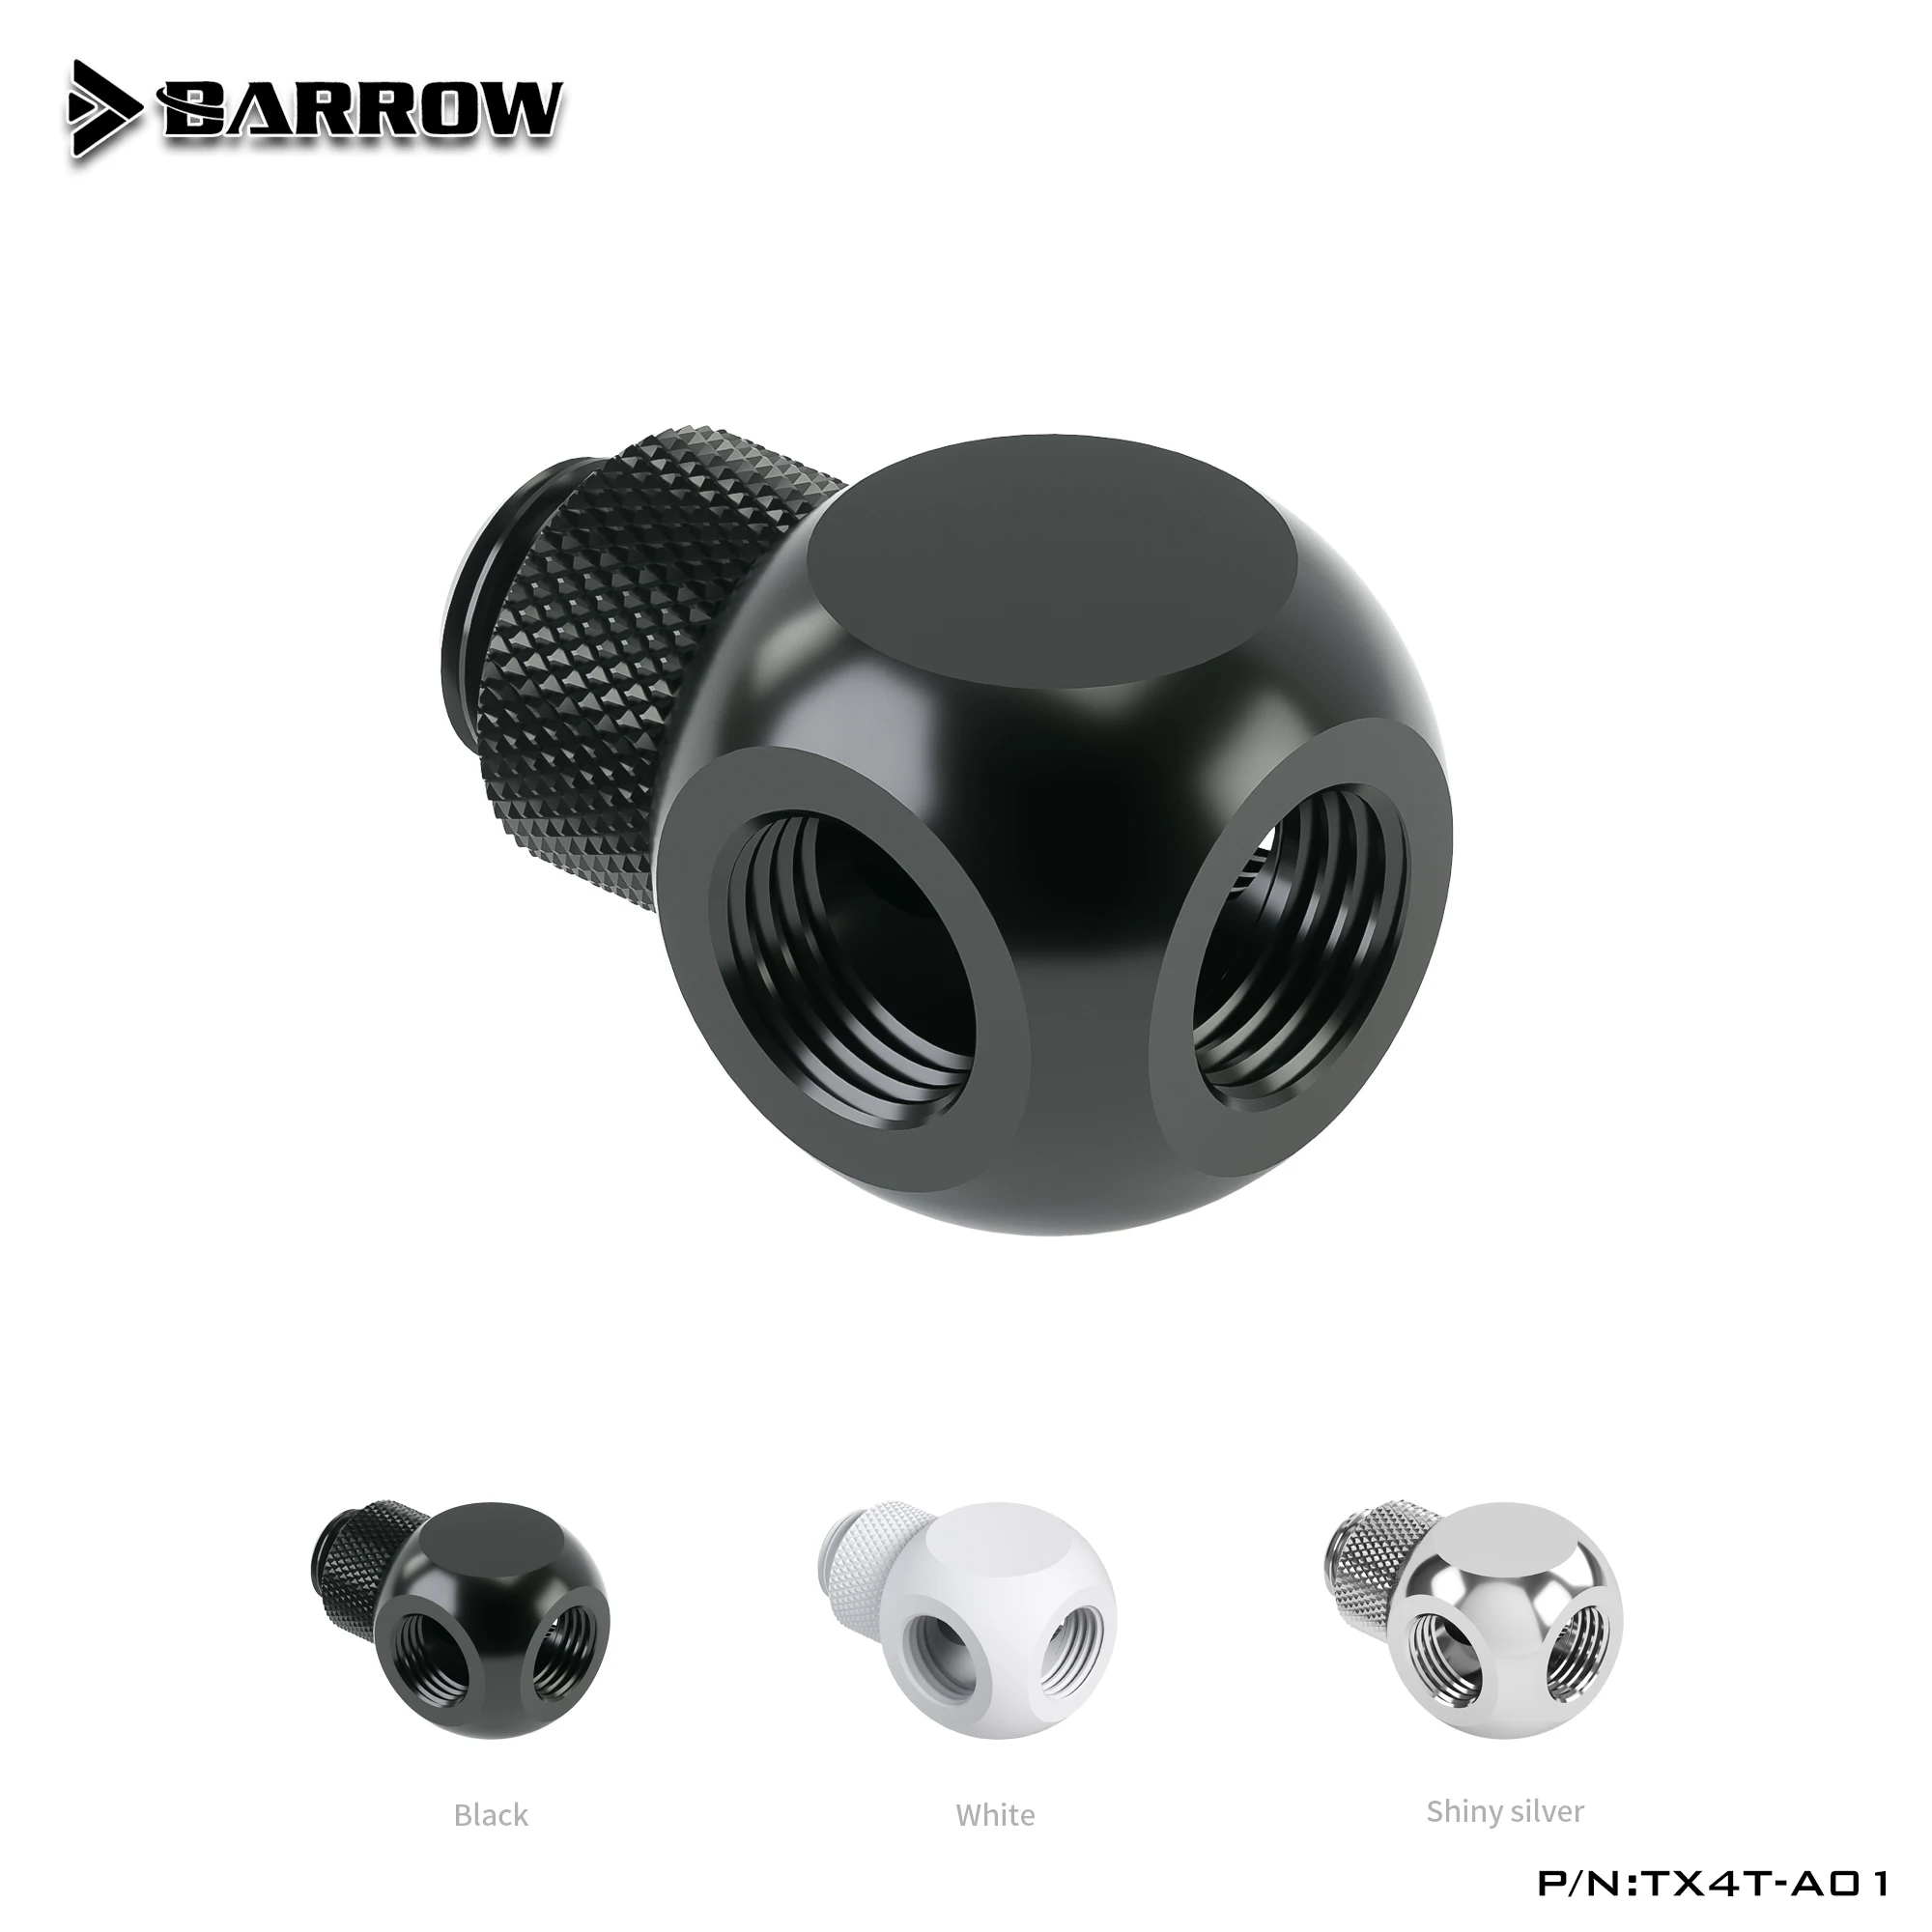 

Barrow G1/4" X4 Black Silver Extender Rotation 4-Way Cubic Adaptor Seat Water Cooling Computer Accessories Fitting